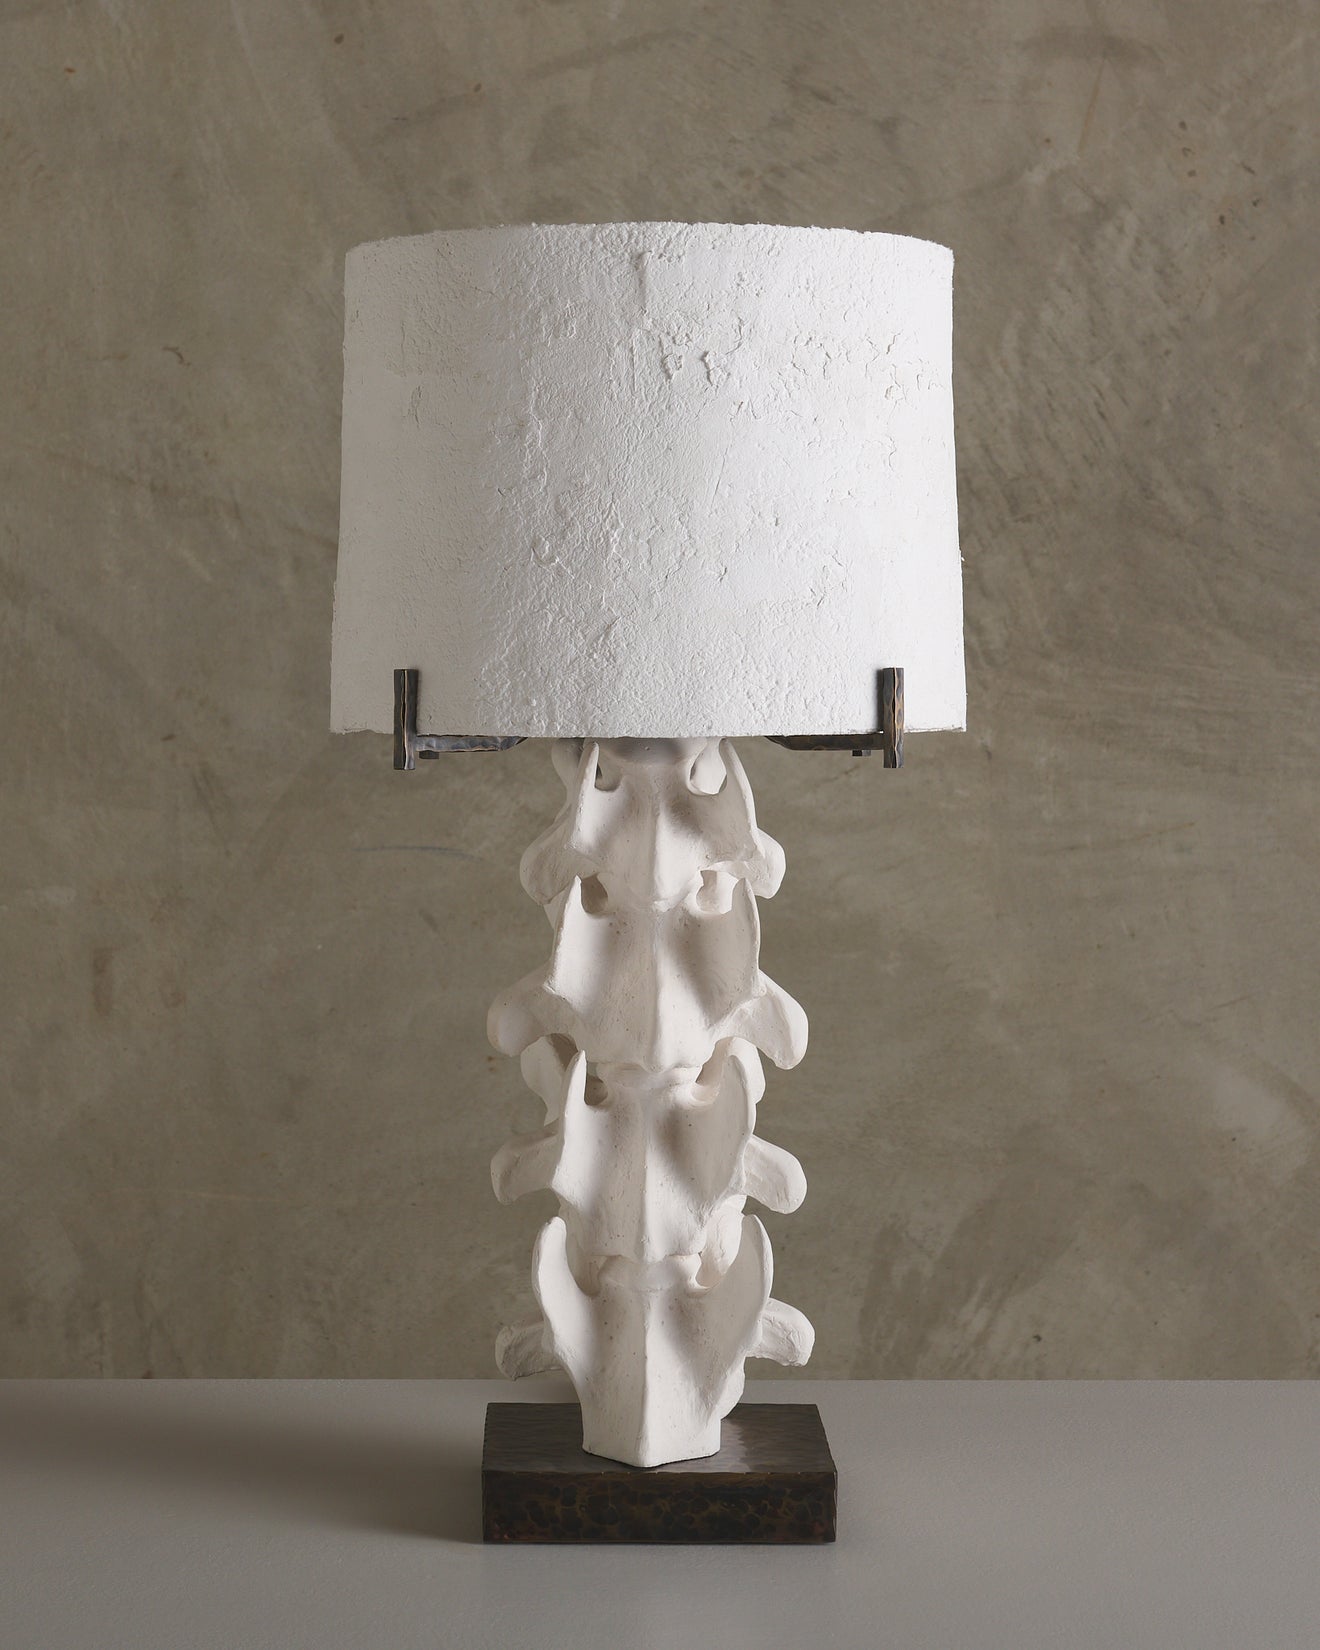 BC WORKSHOP VERTEBRAE TABLE LAMP FROM THE PRIMAL COLLECTION